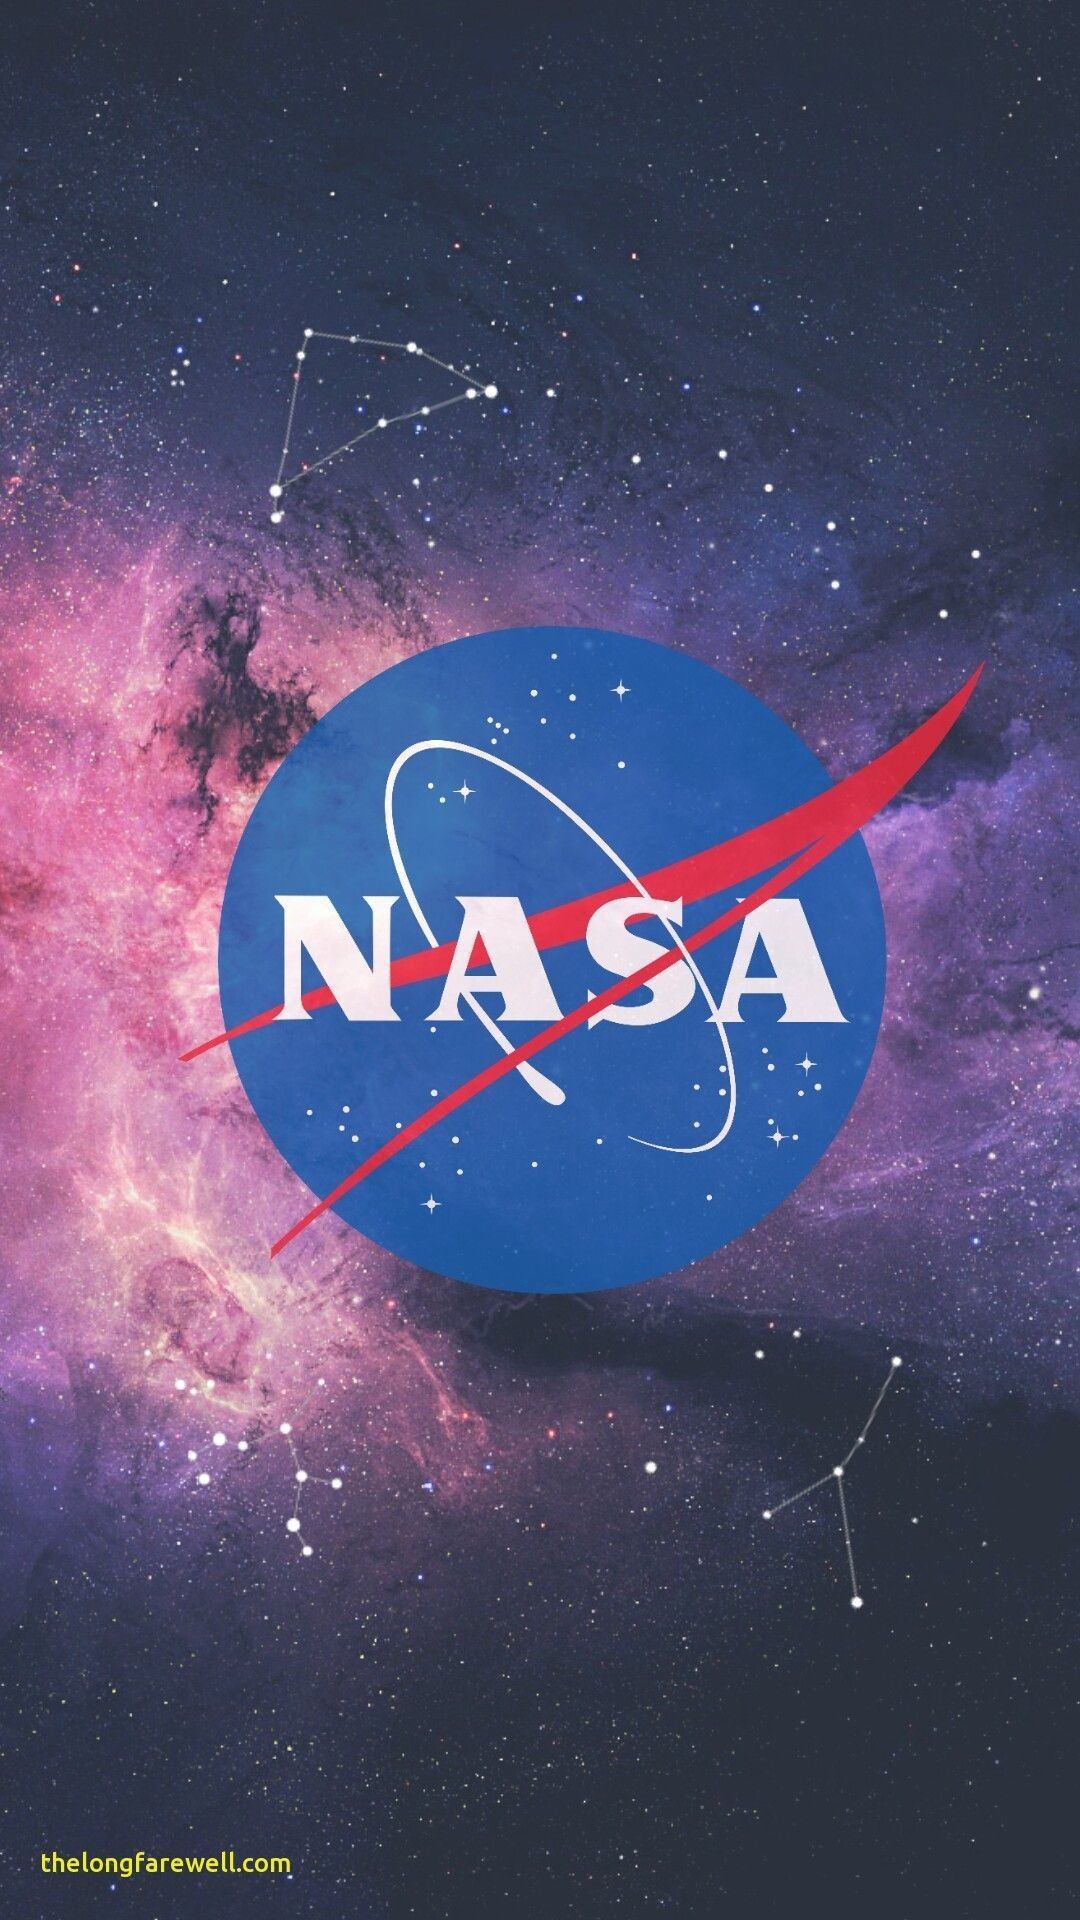 Find this Pin and more on Wallpaper by Idilkrbyk. Nasa